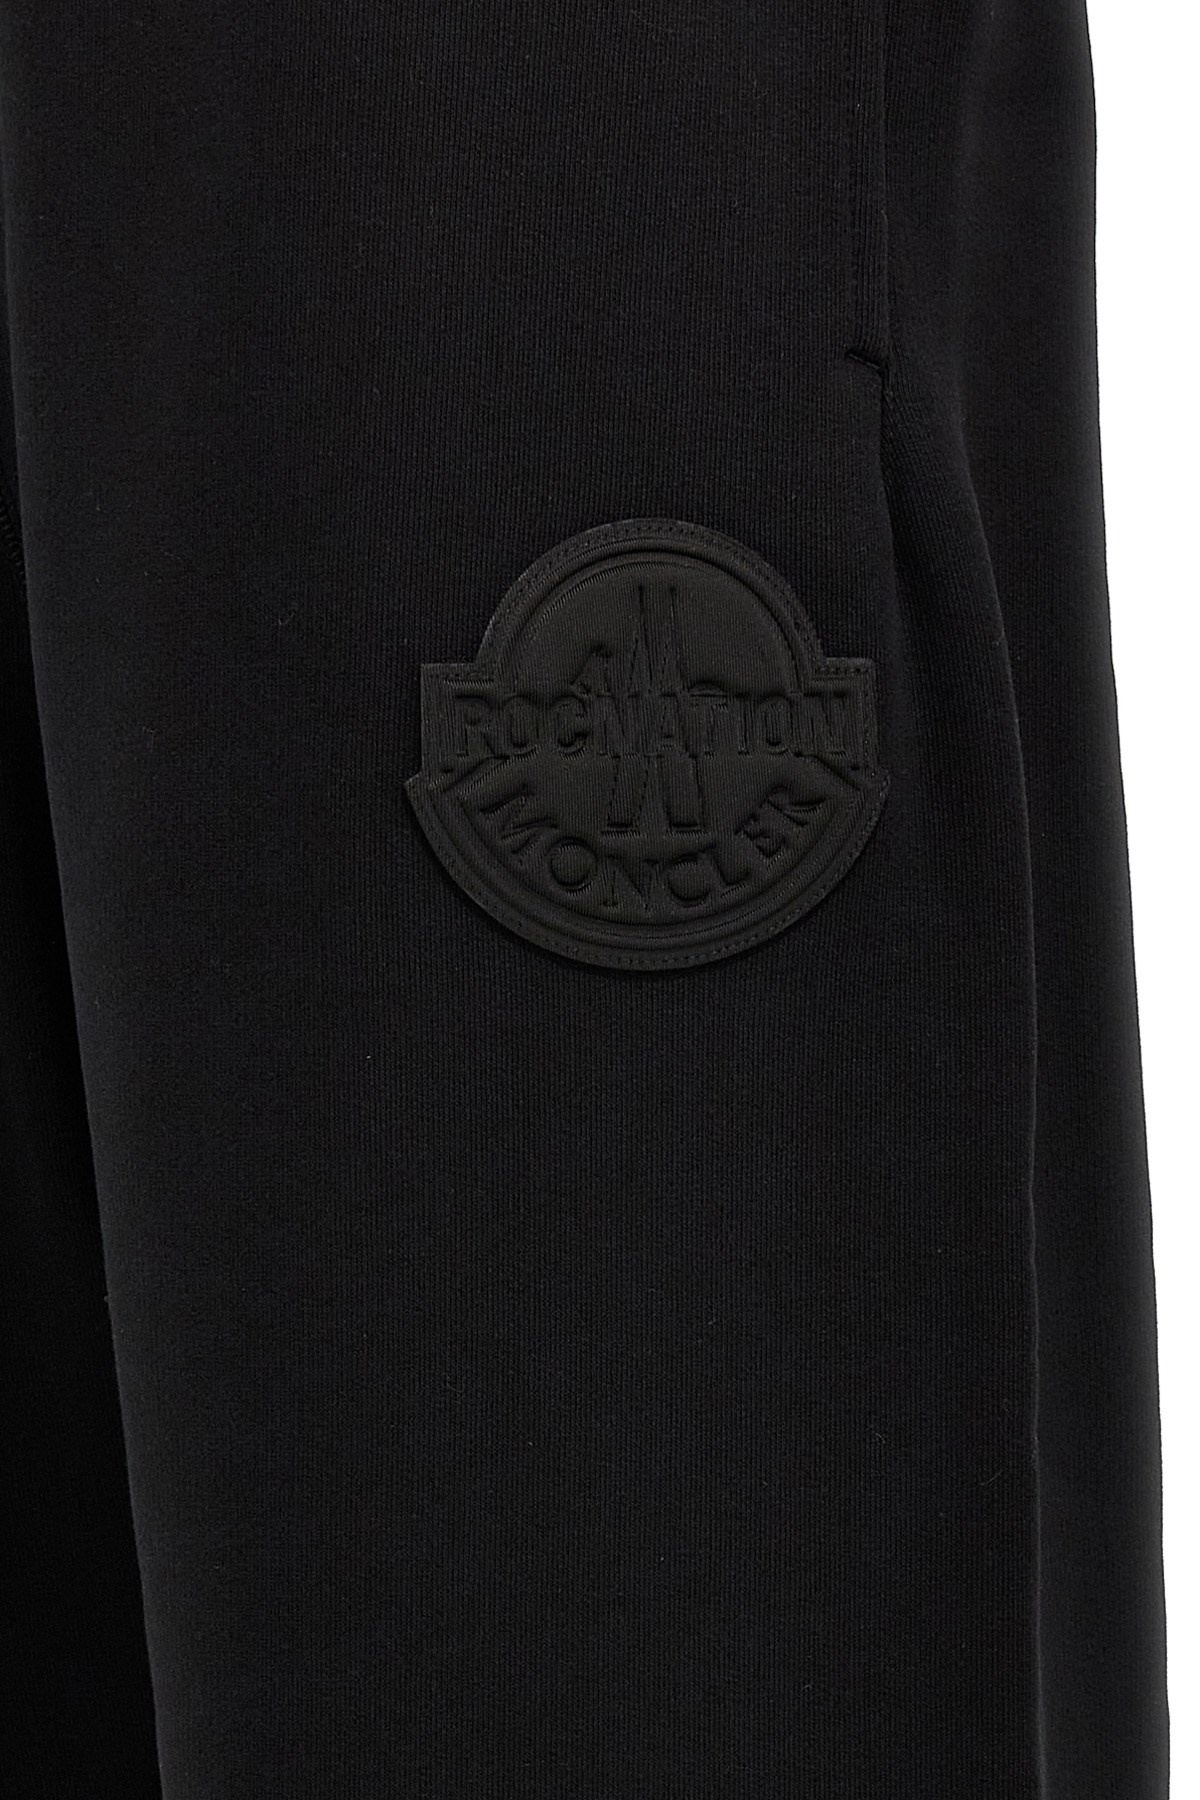 Moncler Genius Roc Nation by Jay-Z joggers - 5